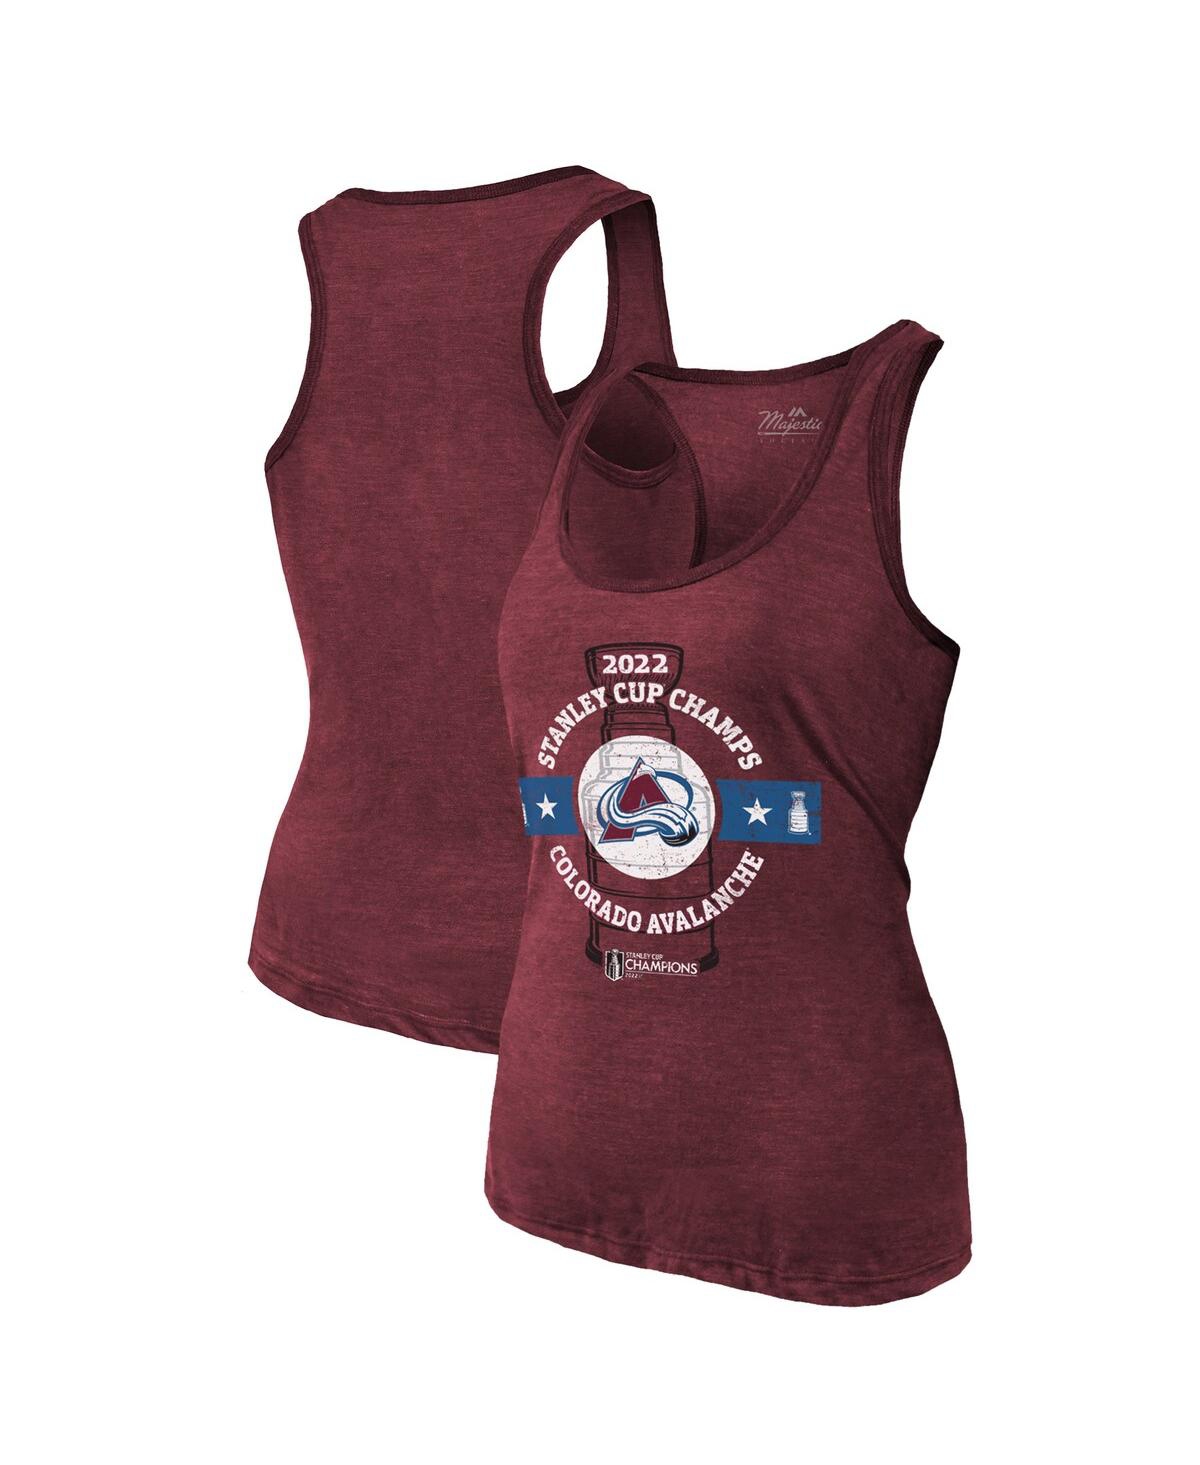 Shop Majestic Women's  Threads Burgundy Colorado Avalanche 2022 Stanley Cup Champions Racerback Tank Top